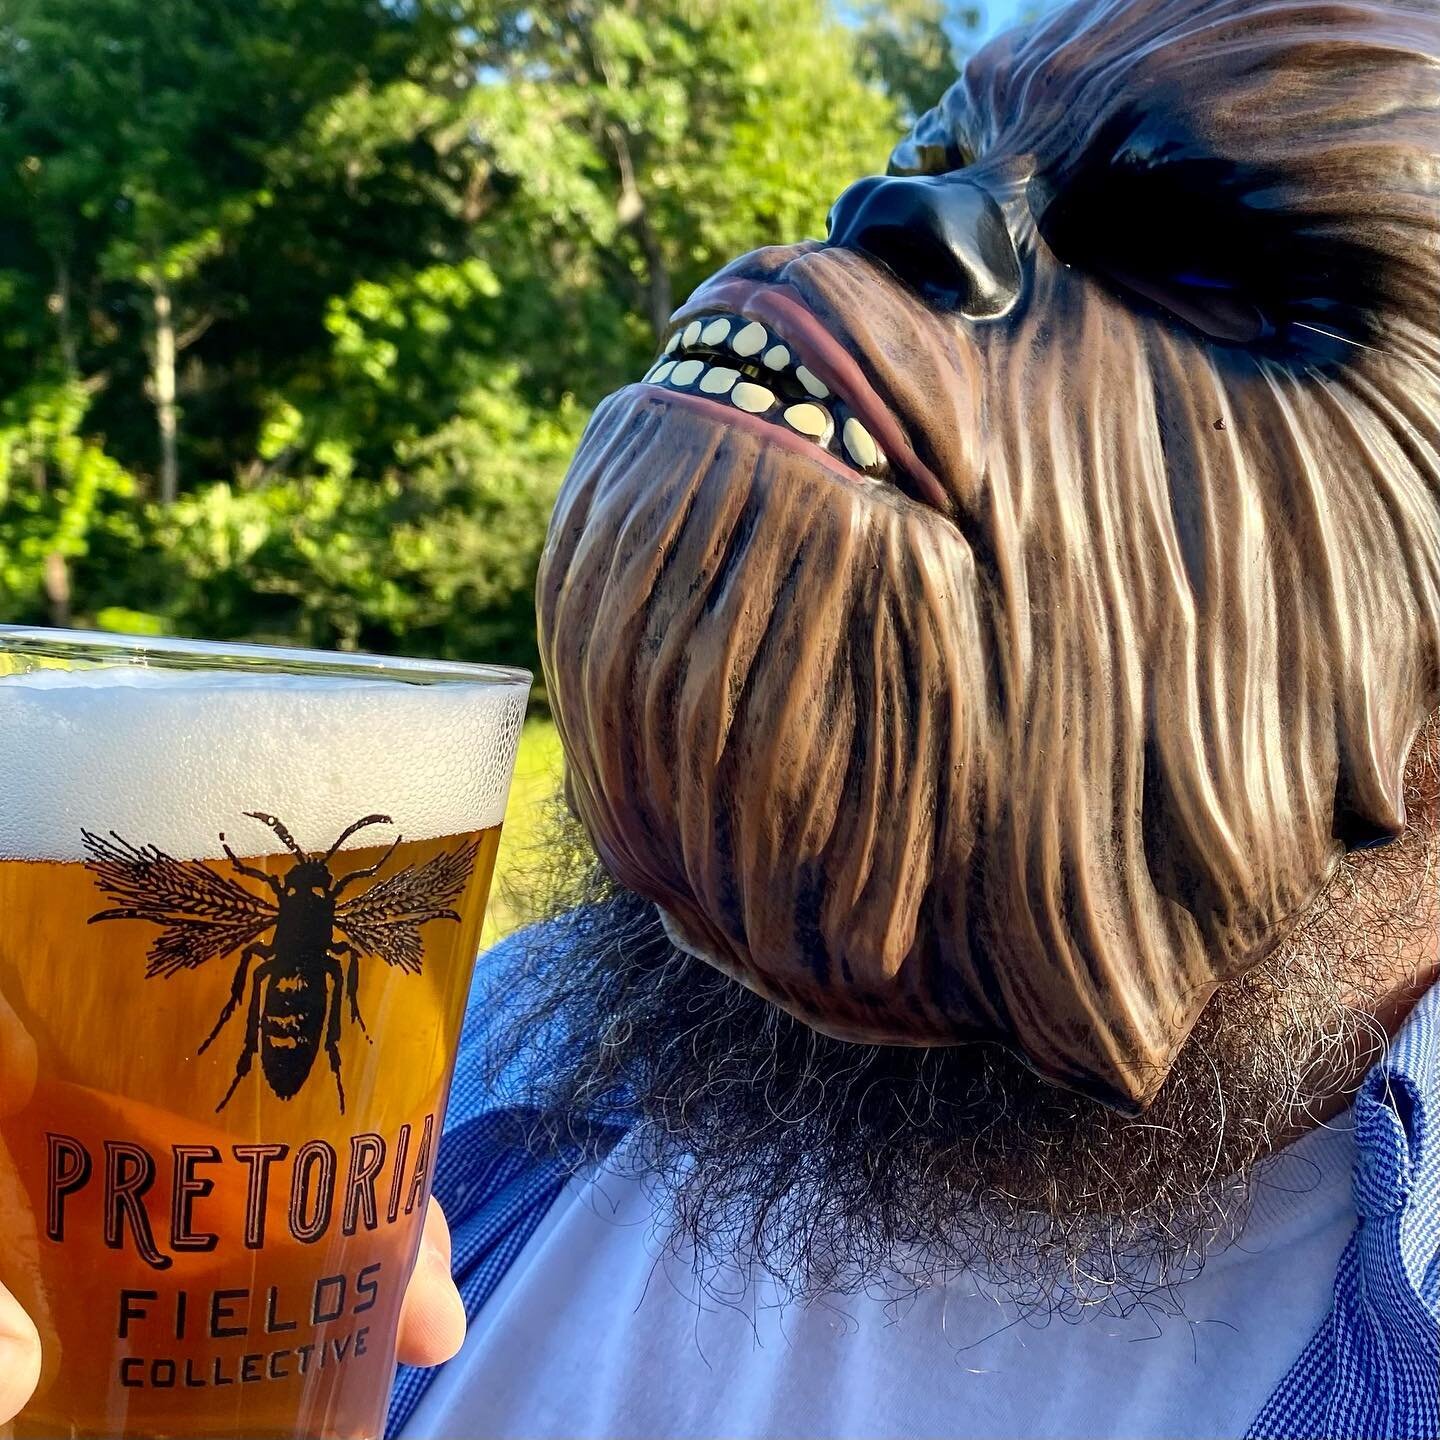 Don&rsquo;t worry, we&rsquo;re not gonna let him win! Head in Thursday, May the Fourth, for an epic night of trivia at the brewery ✨ Get your crew together, it only happens once a year ✨

We&rsquo;ll also have some traditional treats available for pu